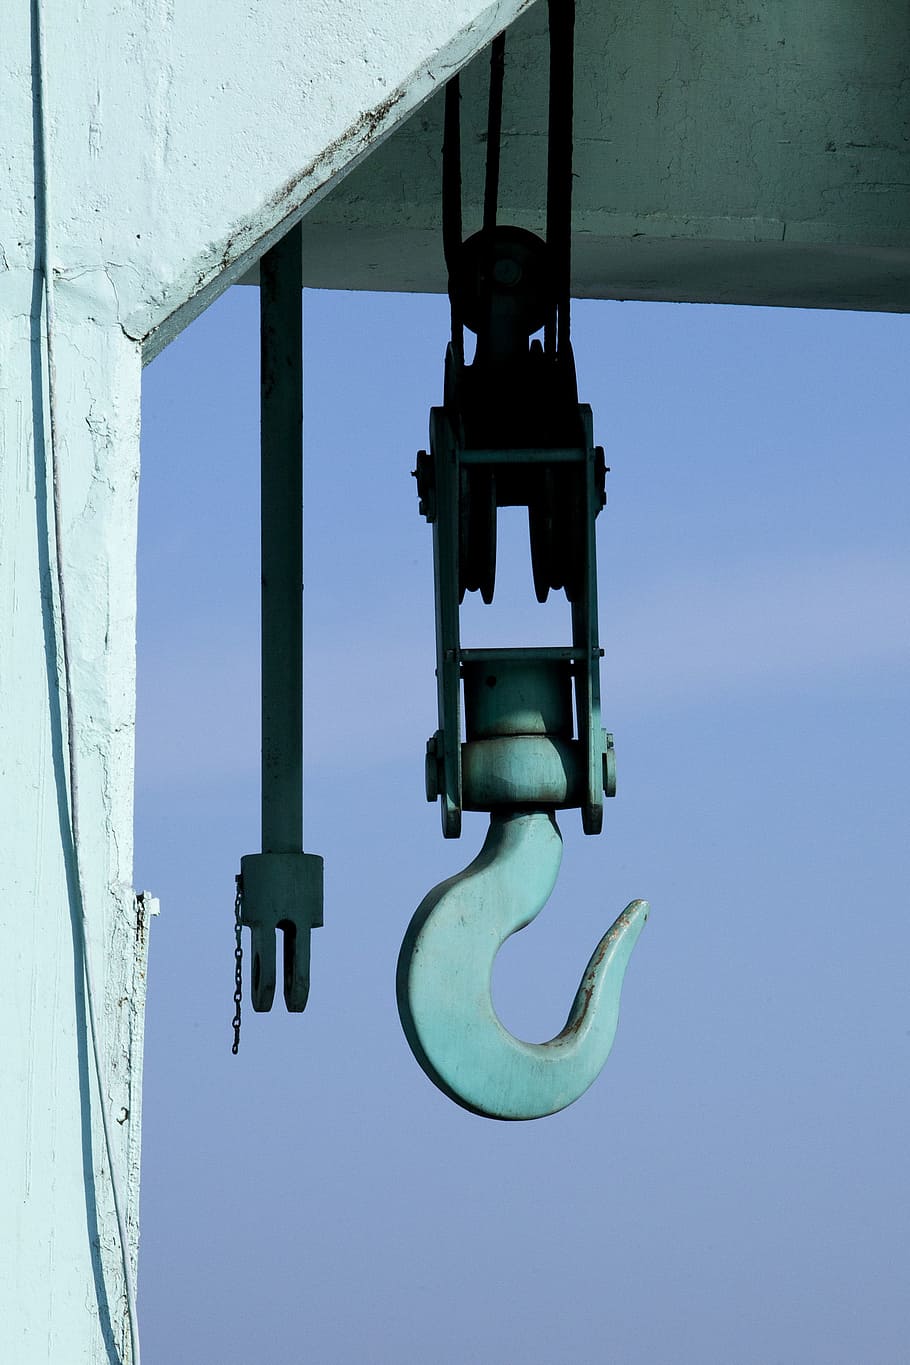 port, times, fob, load, jim, the pulley, beach, ship, sky, blue